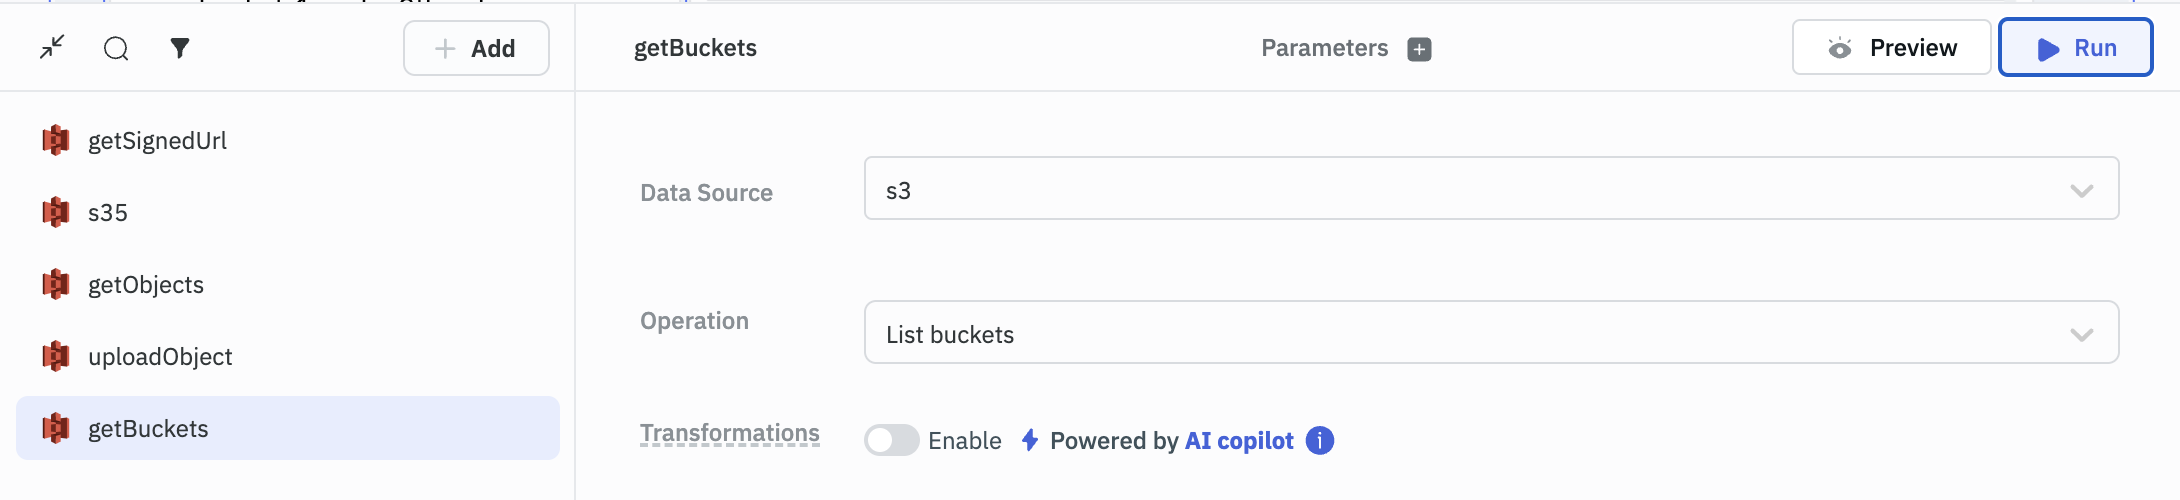 Use S3 pre-signed URL to upload documents: getBuckets query